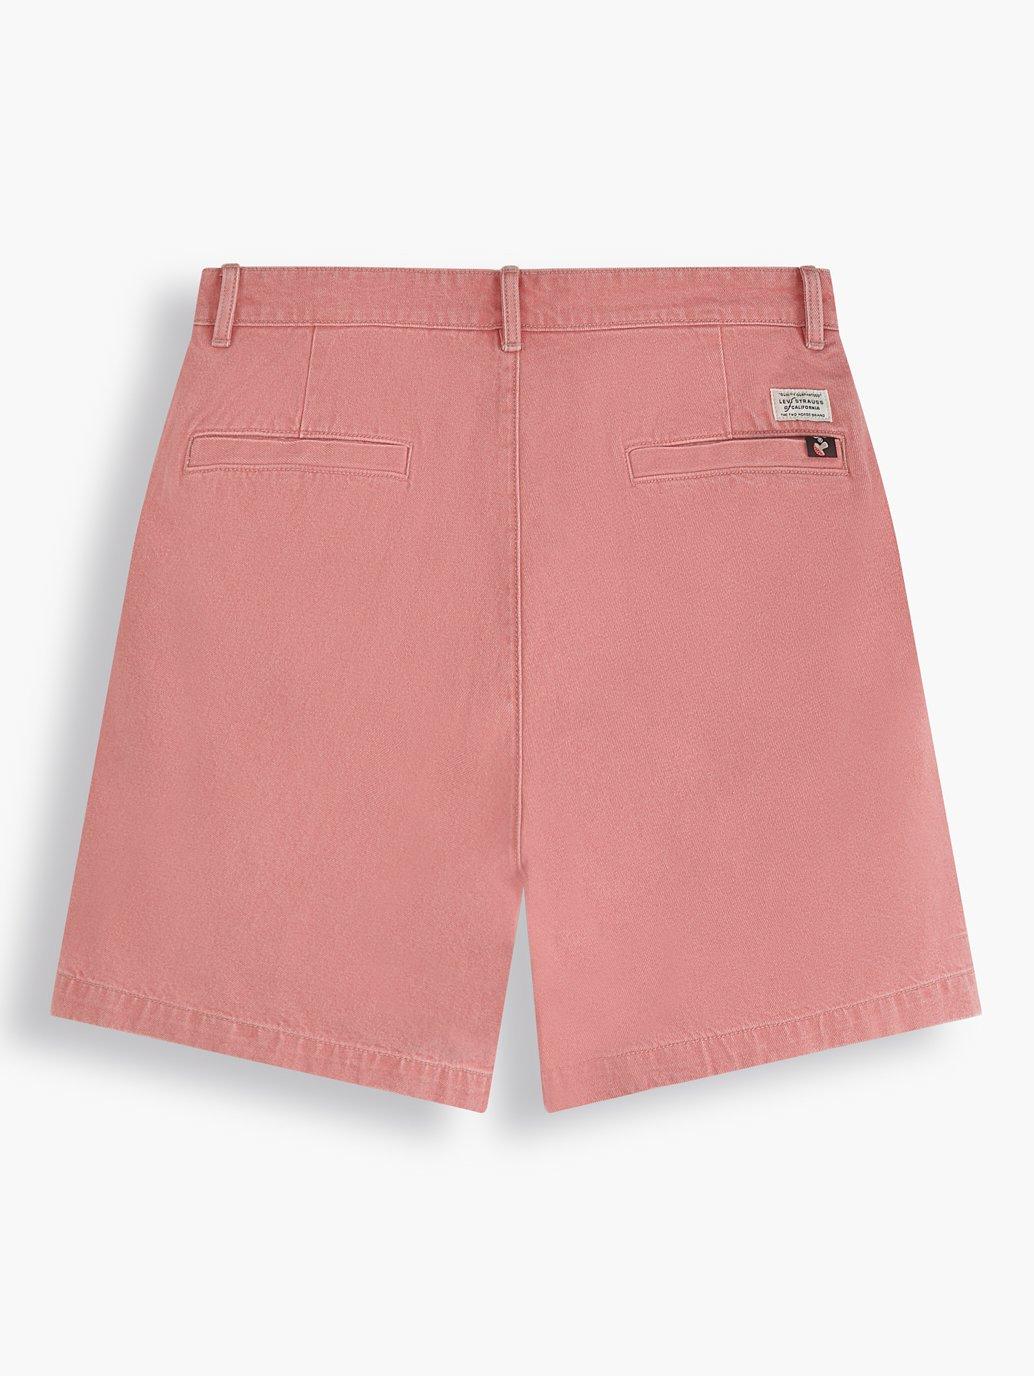 levis singapore mens xx chino pleated shorts A22520004 22 Details